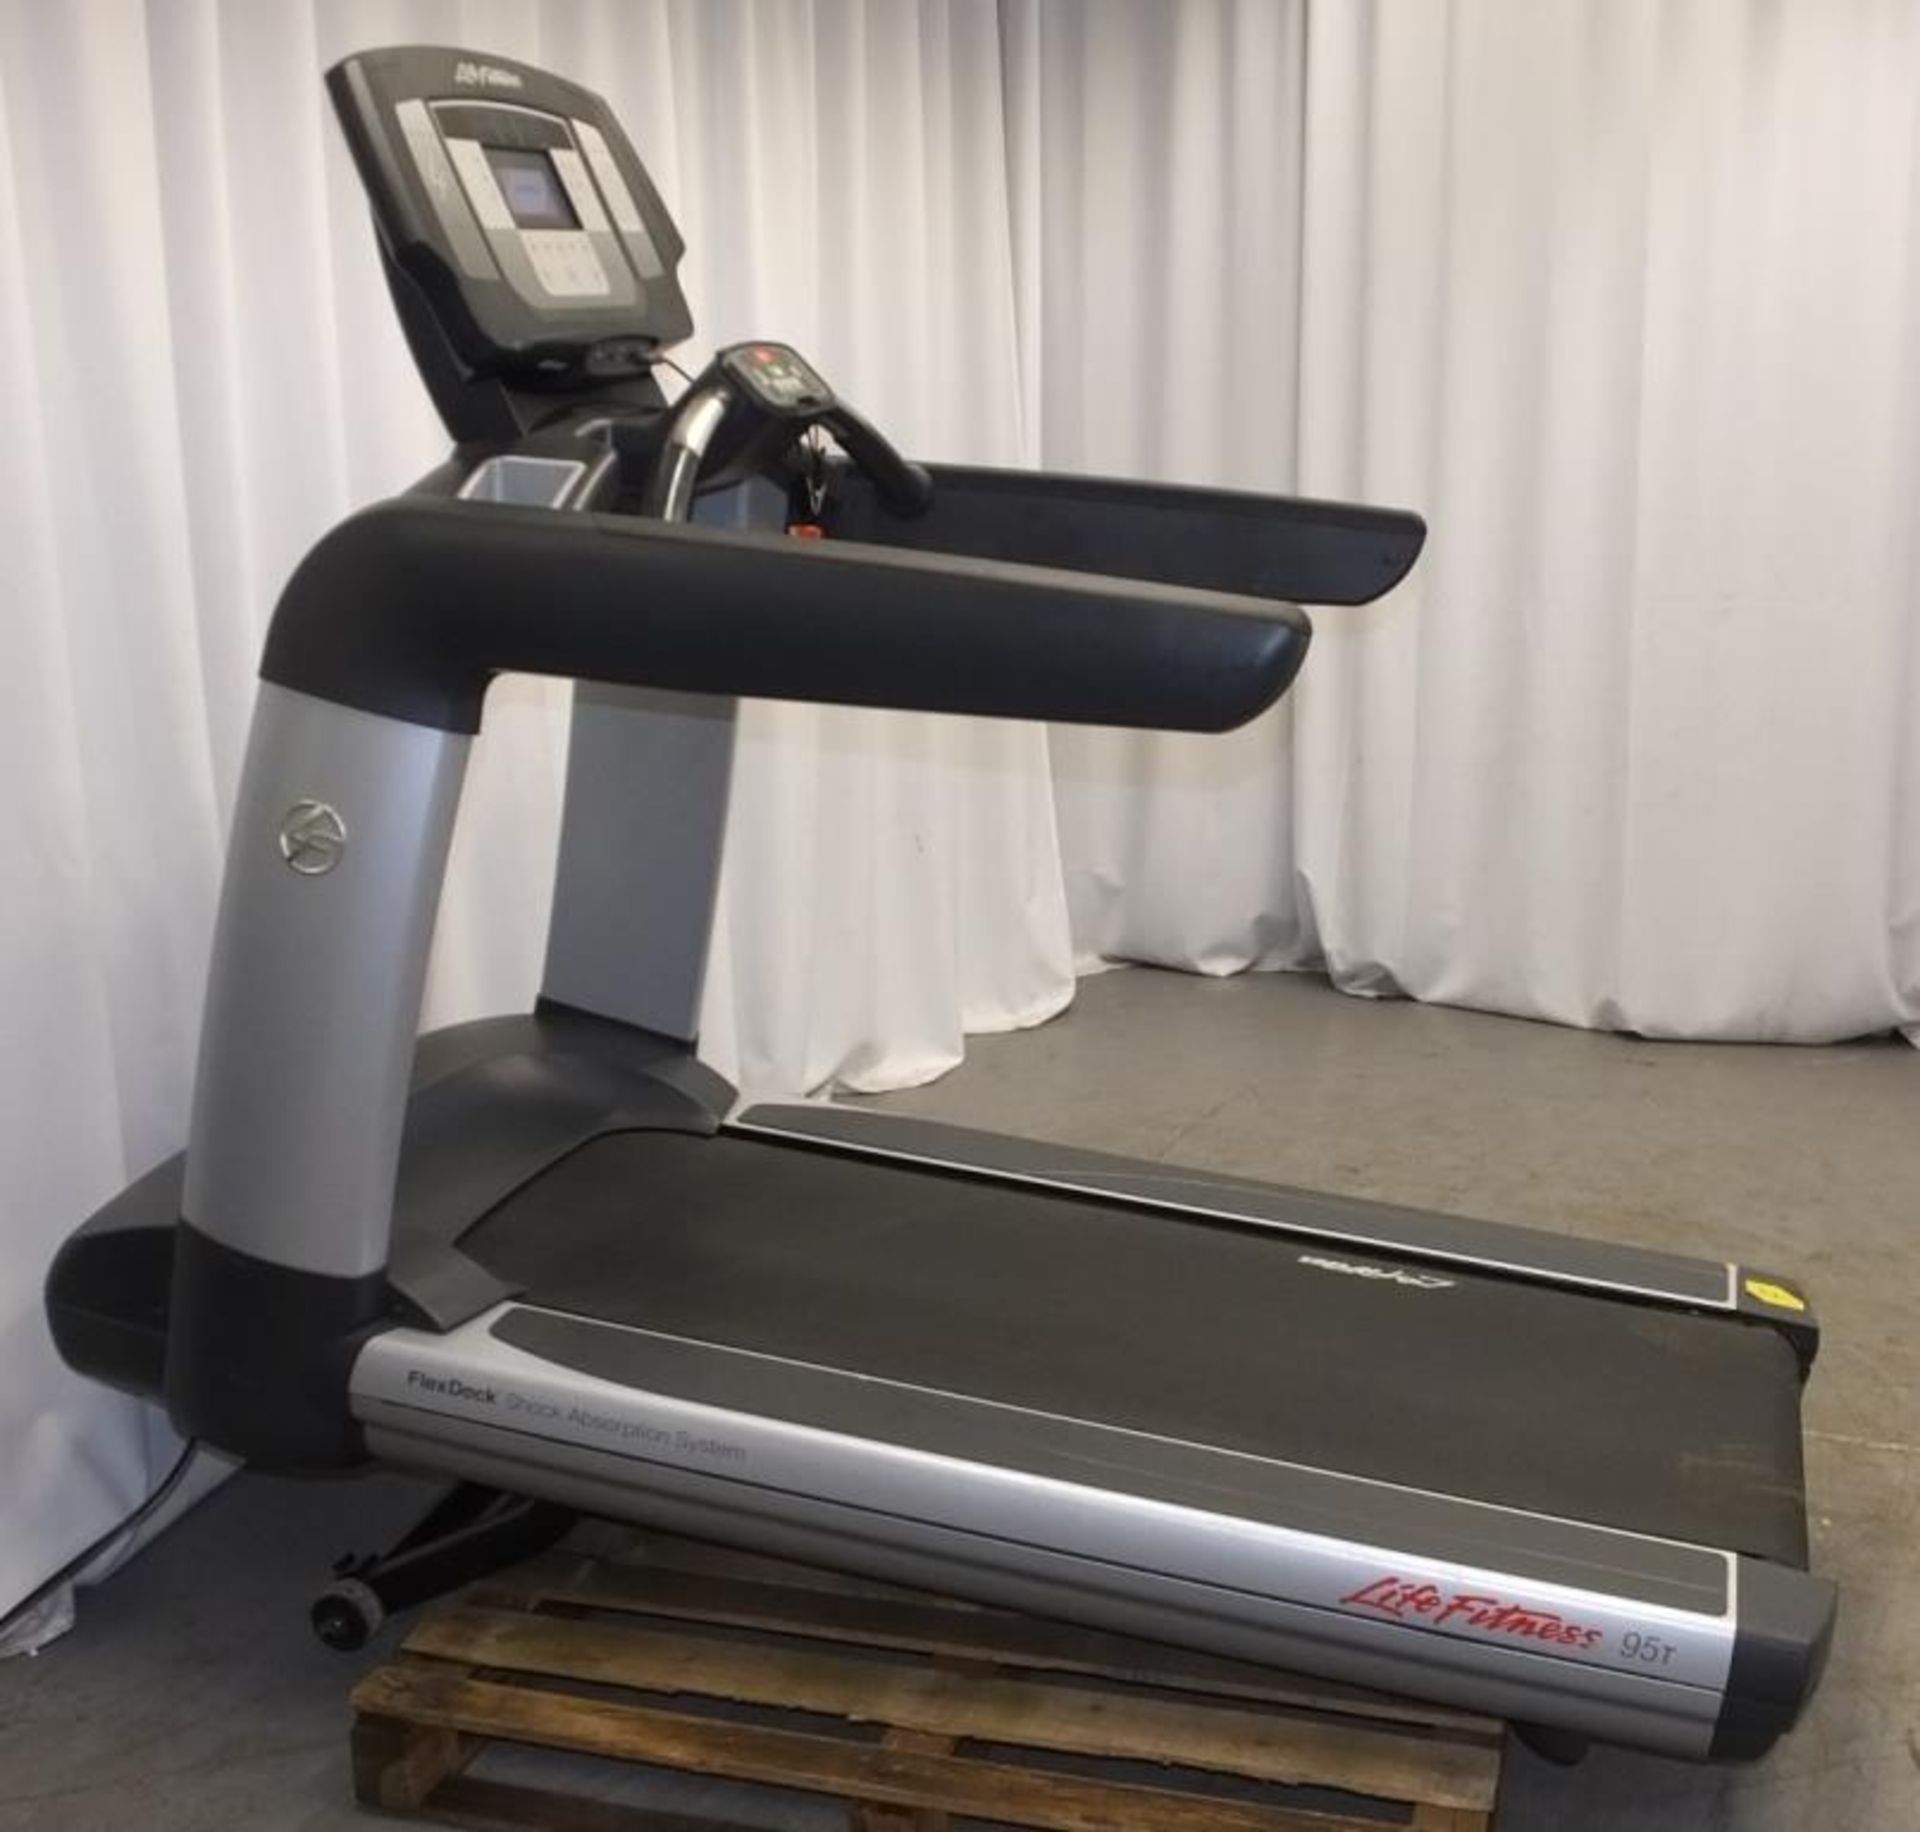 Life Fitness 95T FlexDeck shock absorption system treadmill - powers up - functionality untested